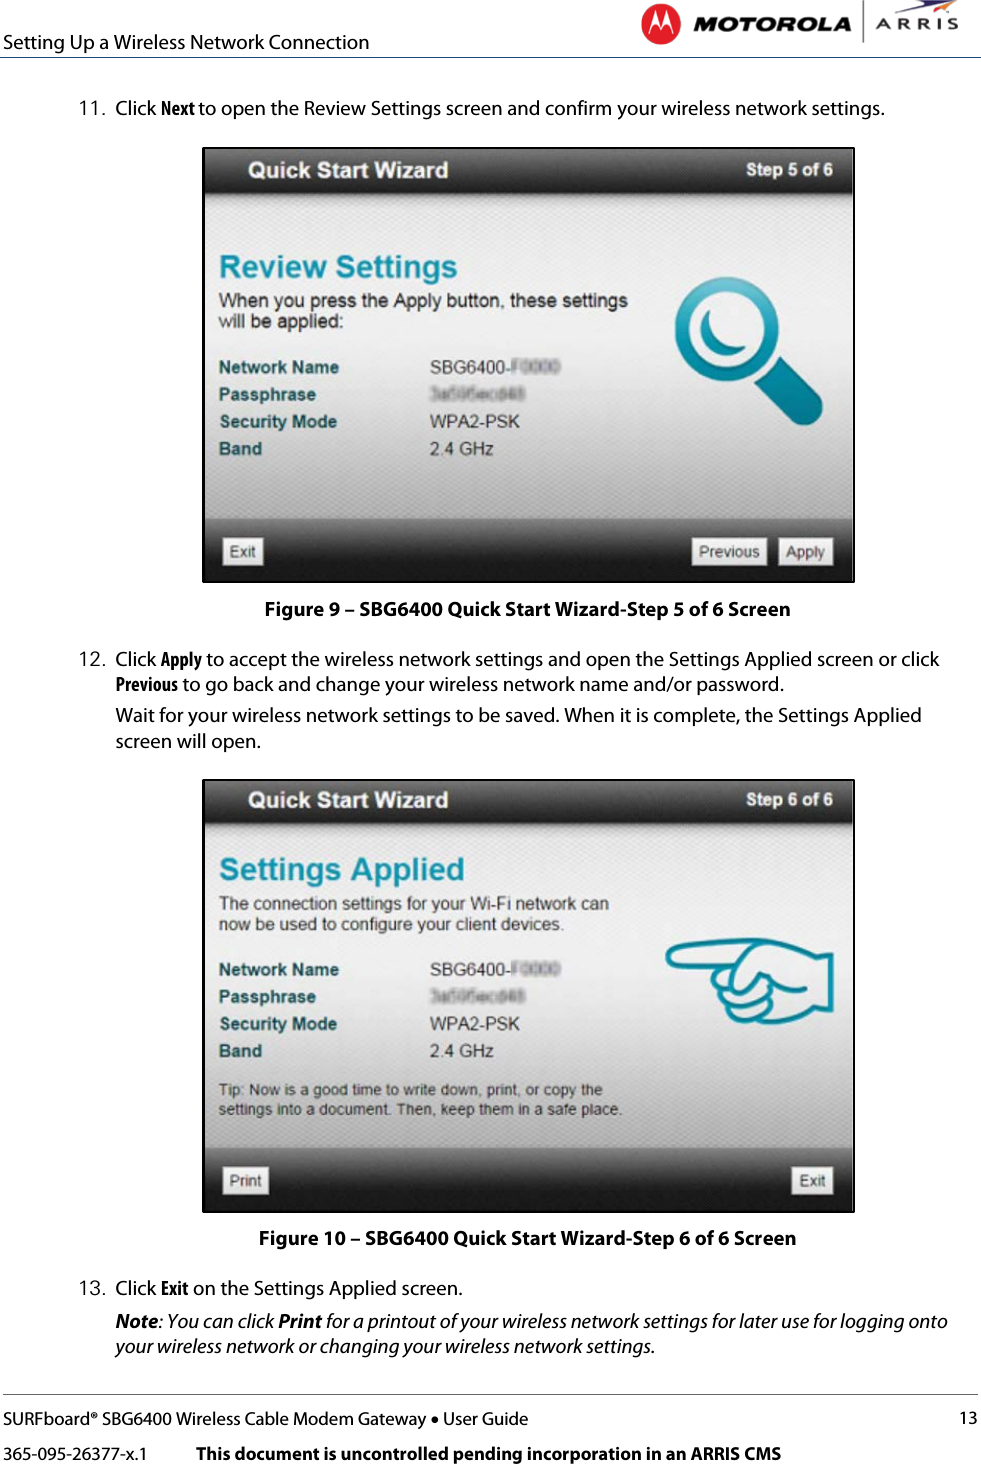 Setting Up a Wireless Network Connection   SURFboard® SBG6400 Wireless Cable Modem Gateway • User Guide 13 365-095-26377-x.1            This document is uncontrolled pending incorporation in an ARRIS CMS  11. Click Next to open the Review Settings screen and confirm your wireless network settings.   Figure 9 – SBG6400 Quick Start Wizard-Step 5 of 6 Screen 12. Click Apply to accept the wireless network settings and open the Settings Applied screen or click Previous to go back and change your wireless network name and/or password. Wait for your wireless network settings to be saved. When it is complete, the Settings Applied screen will open.   Figure 10 – SBG6400 Quick Start Wizard-Step 6 of 6 Screen 13. Click Exit on the Settings Applied screen. Note: You can click Print for a printout of your wireless network settings for later use for logging onto your wireless network or changing your wireless network settings. 